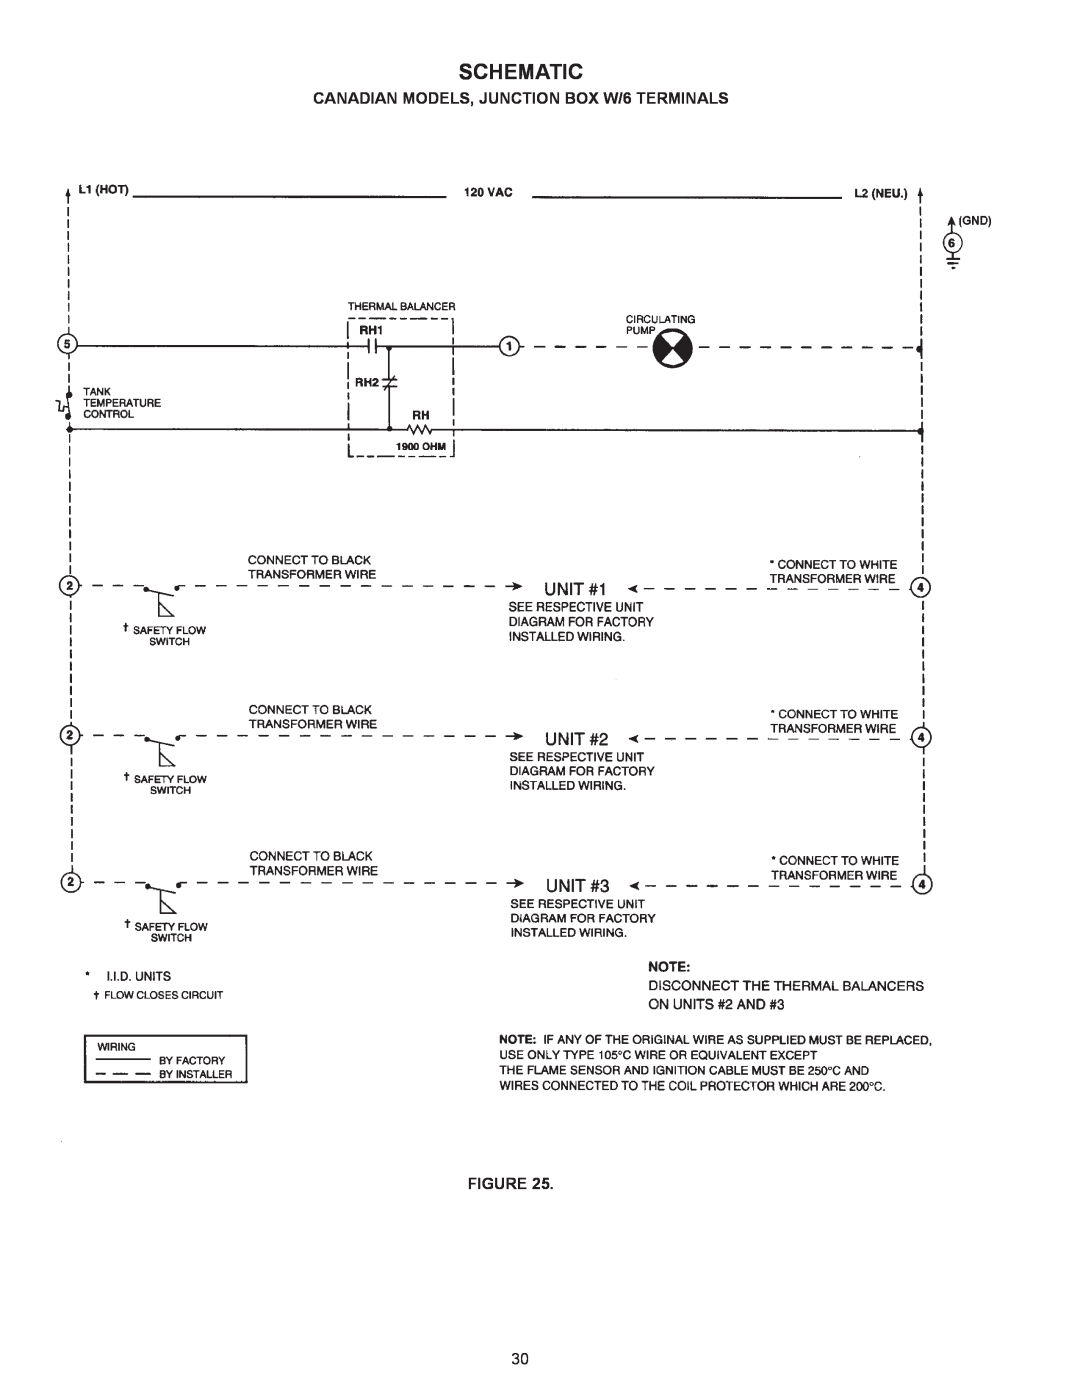 A.O. Smith HW 610 warranty Schematic, CANADIAN MODELS, JUNCTION BOX W/6 TERMINALS 